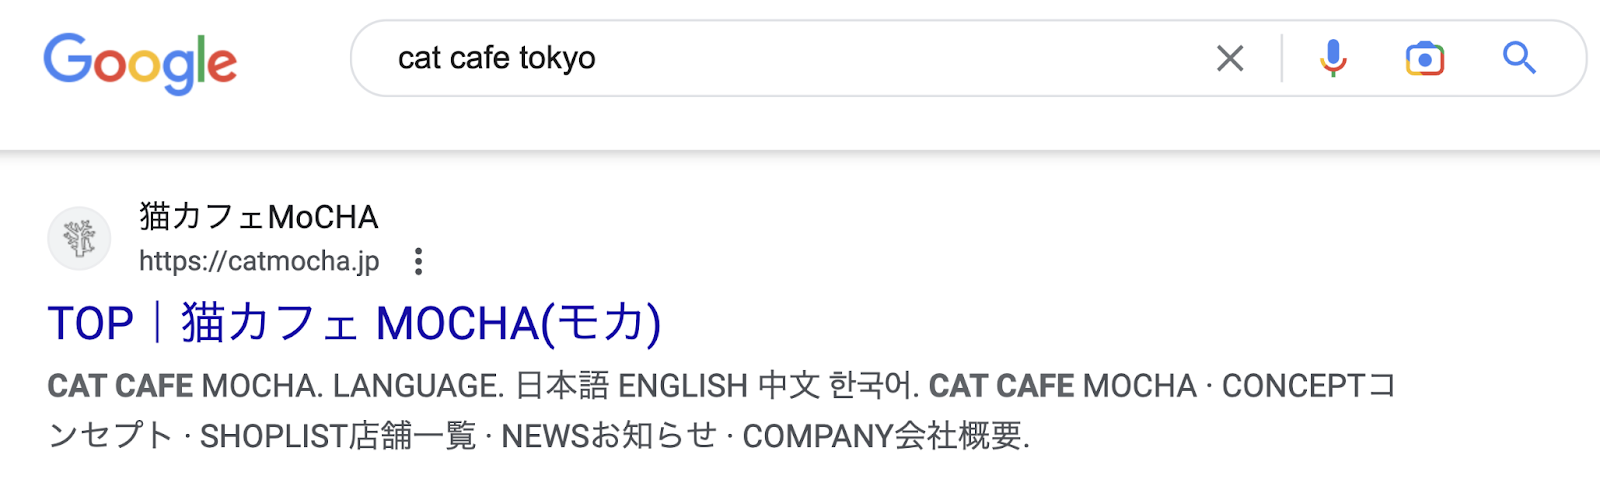 first Google search result for "cat cafe tokyo"